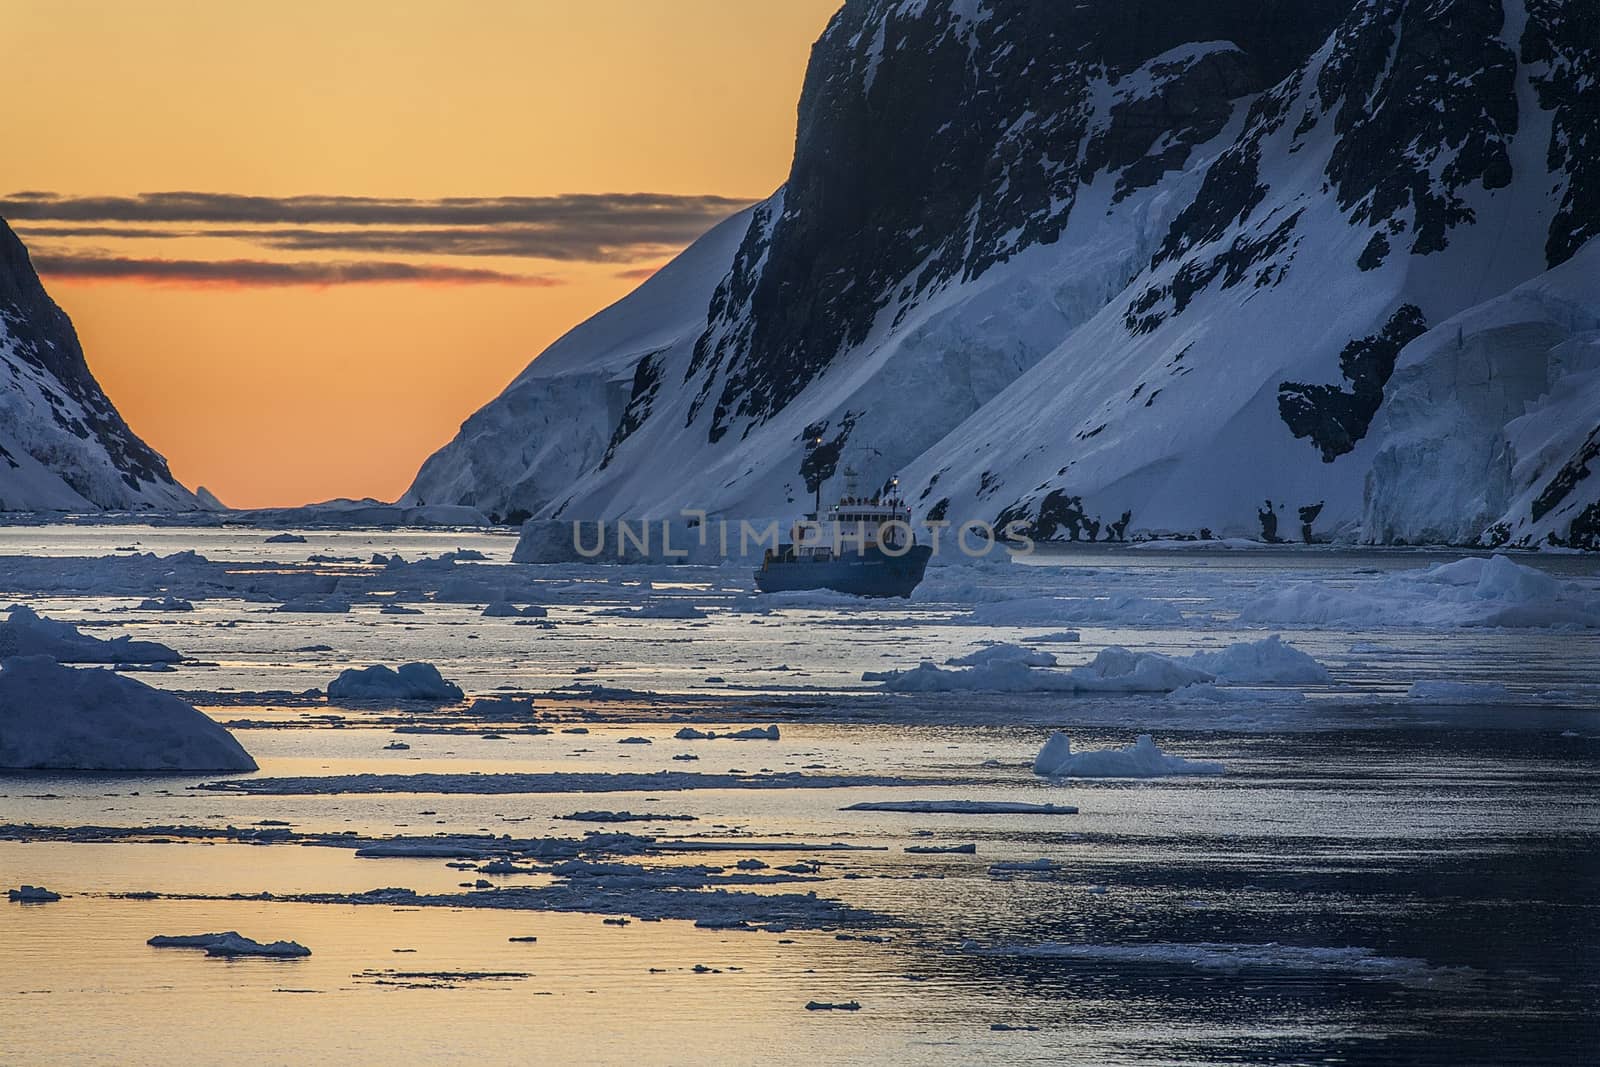 Tourist icebreaker in the dramatic scenery of the Lemaire Channel on the Antarctic Peninsula in Antarctica. Photo taken at 3am by the light of the Midnight Sun.